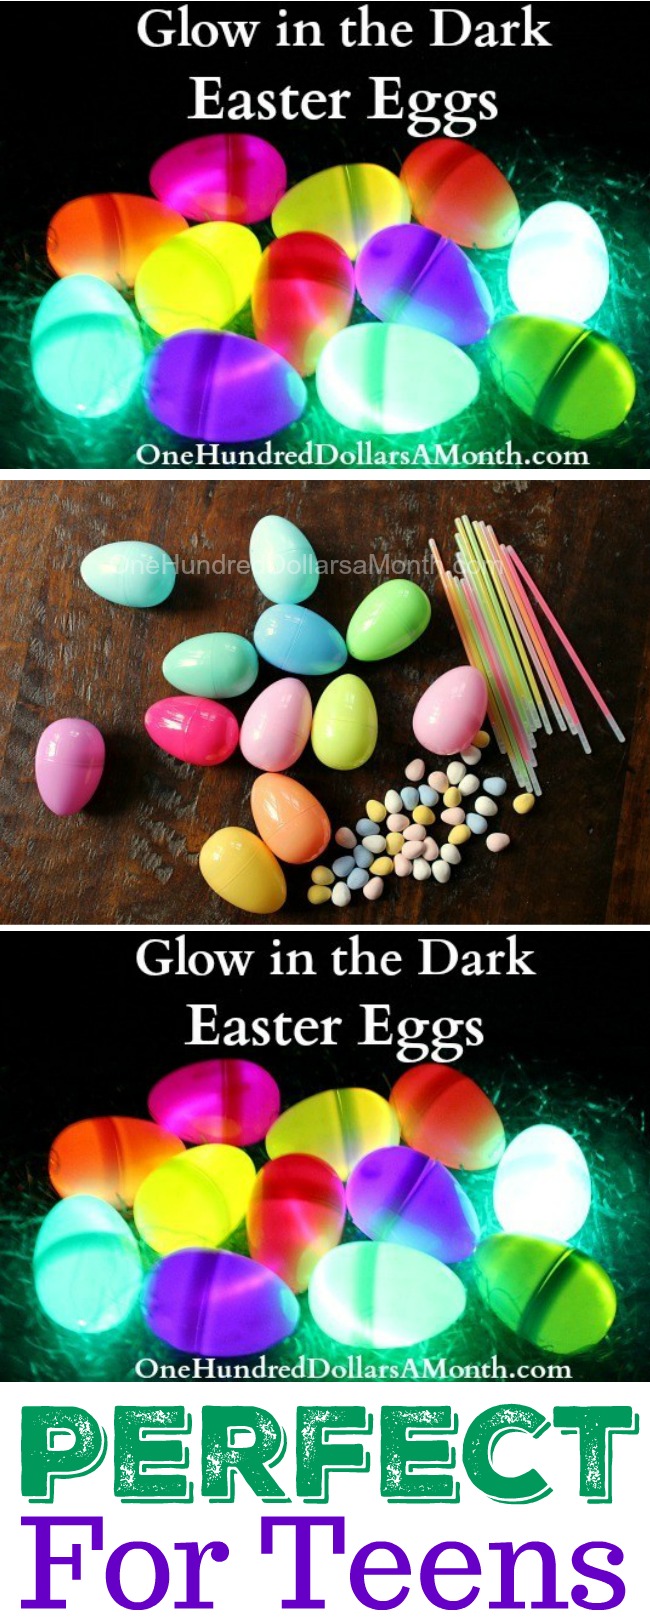 Glow in the Dark Easter Eggs with Glow Sticks